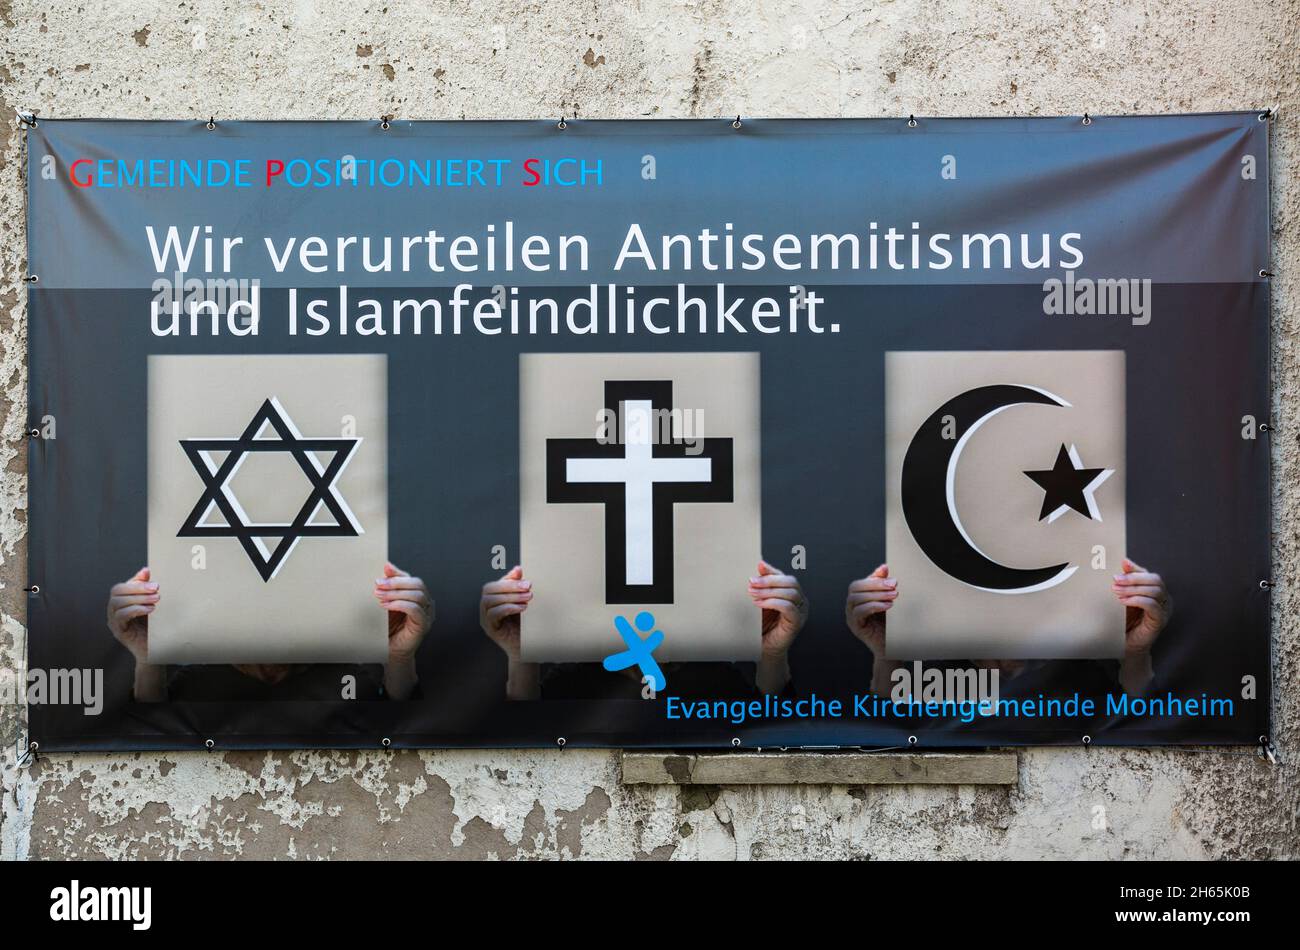 Germany, Society, Religion, Christian Morality, on a banner the Evangelical Congreation of Monheim am Rhein disapproves strongly antisemitism and hostility to Islam, symbols for Judaism and Christianity and Islam are compared as coexistent and equally Stock Photo